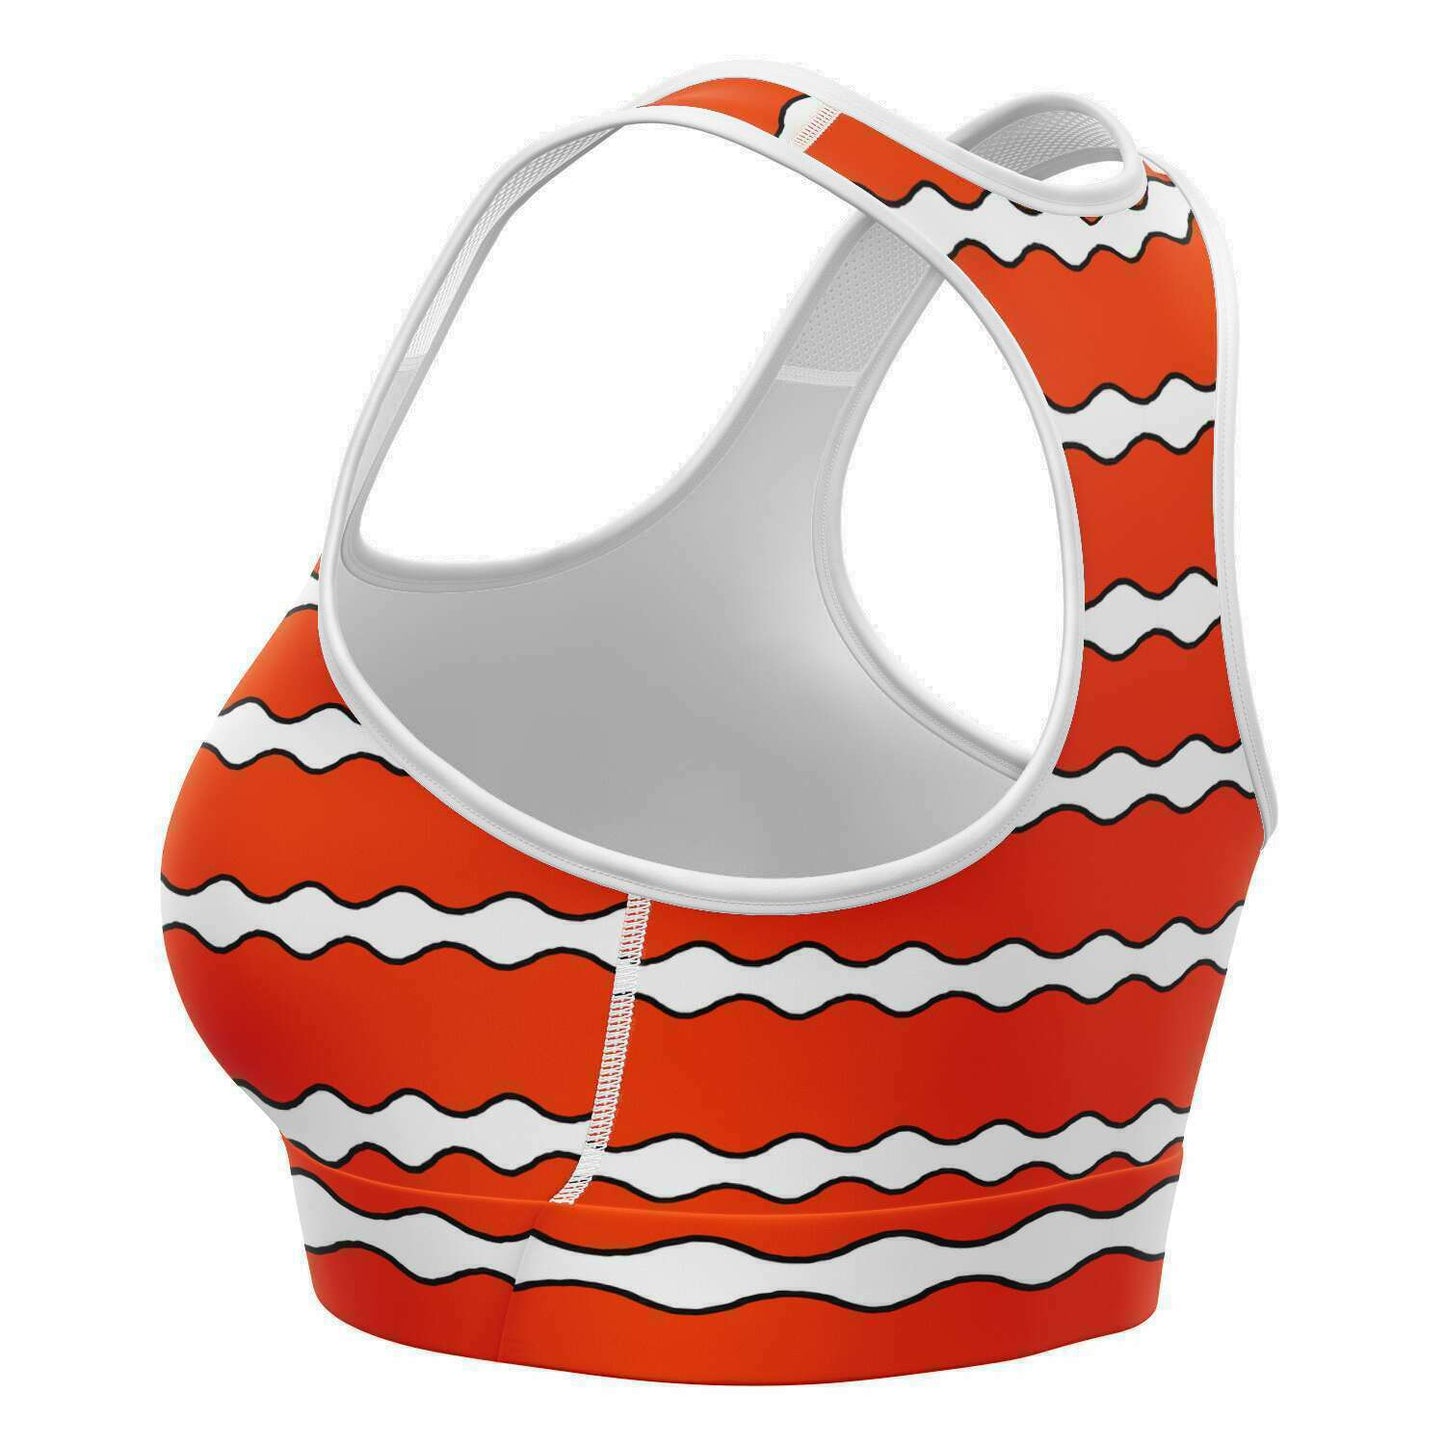 Clownfish racer-back crop top / sports bra back and side view to see inside with moisture wicking